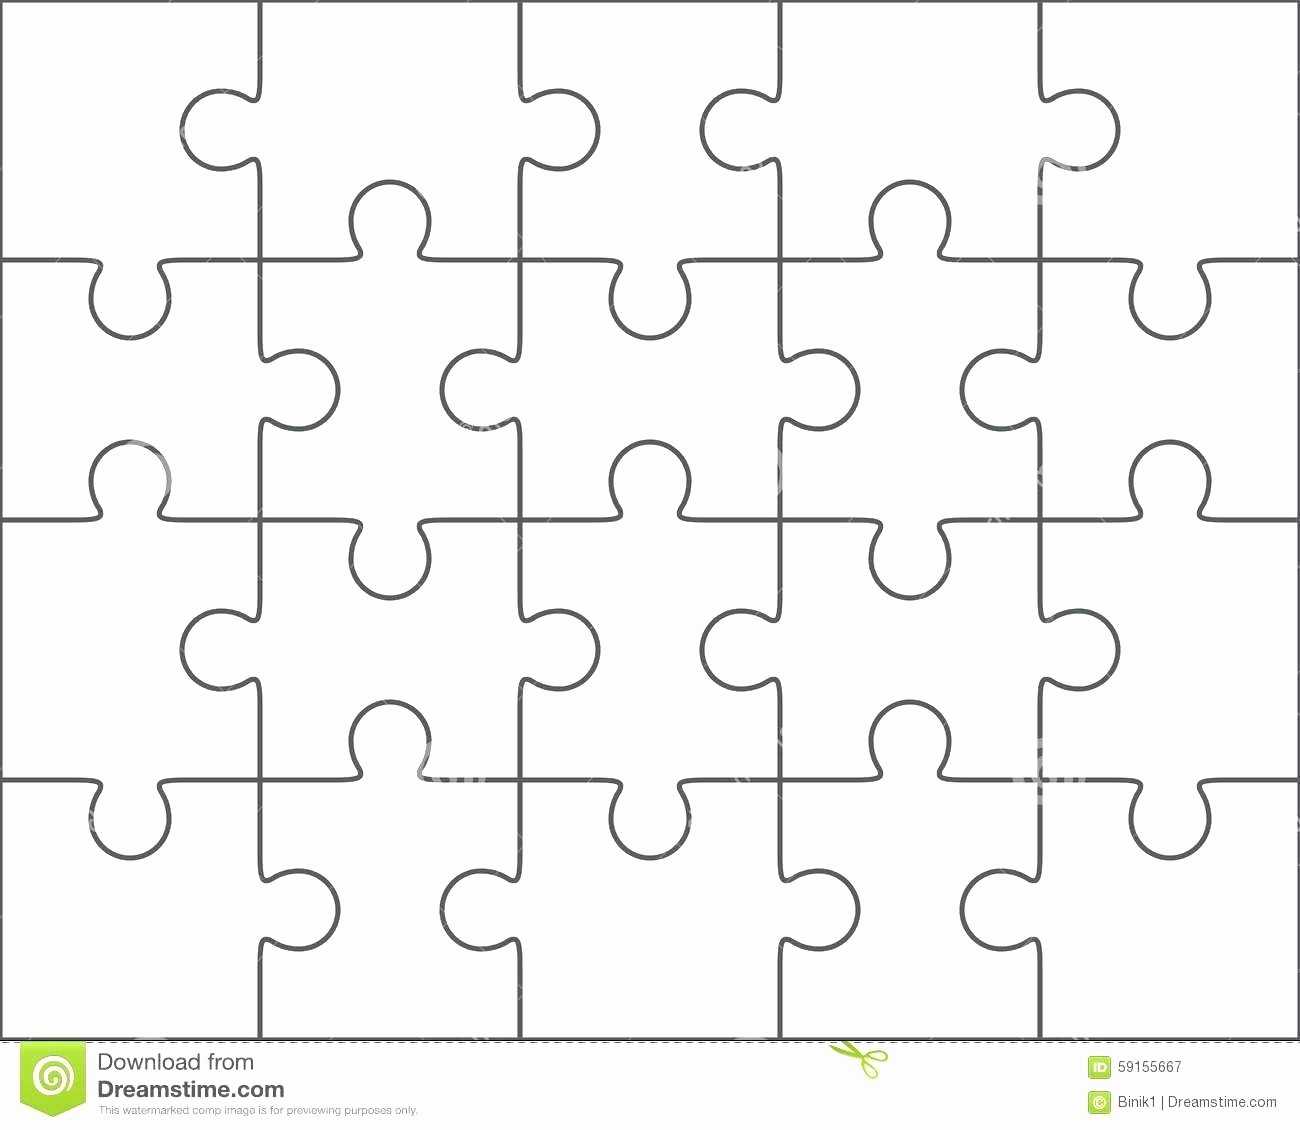 Puzzle Pieces Template For Word Best Of Template 5 Piece Pertaining To Jigsaw Puzzle Template For Word